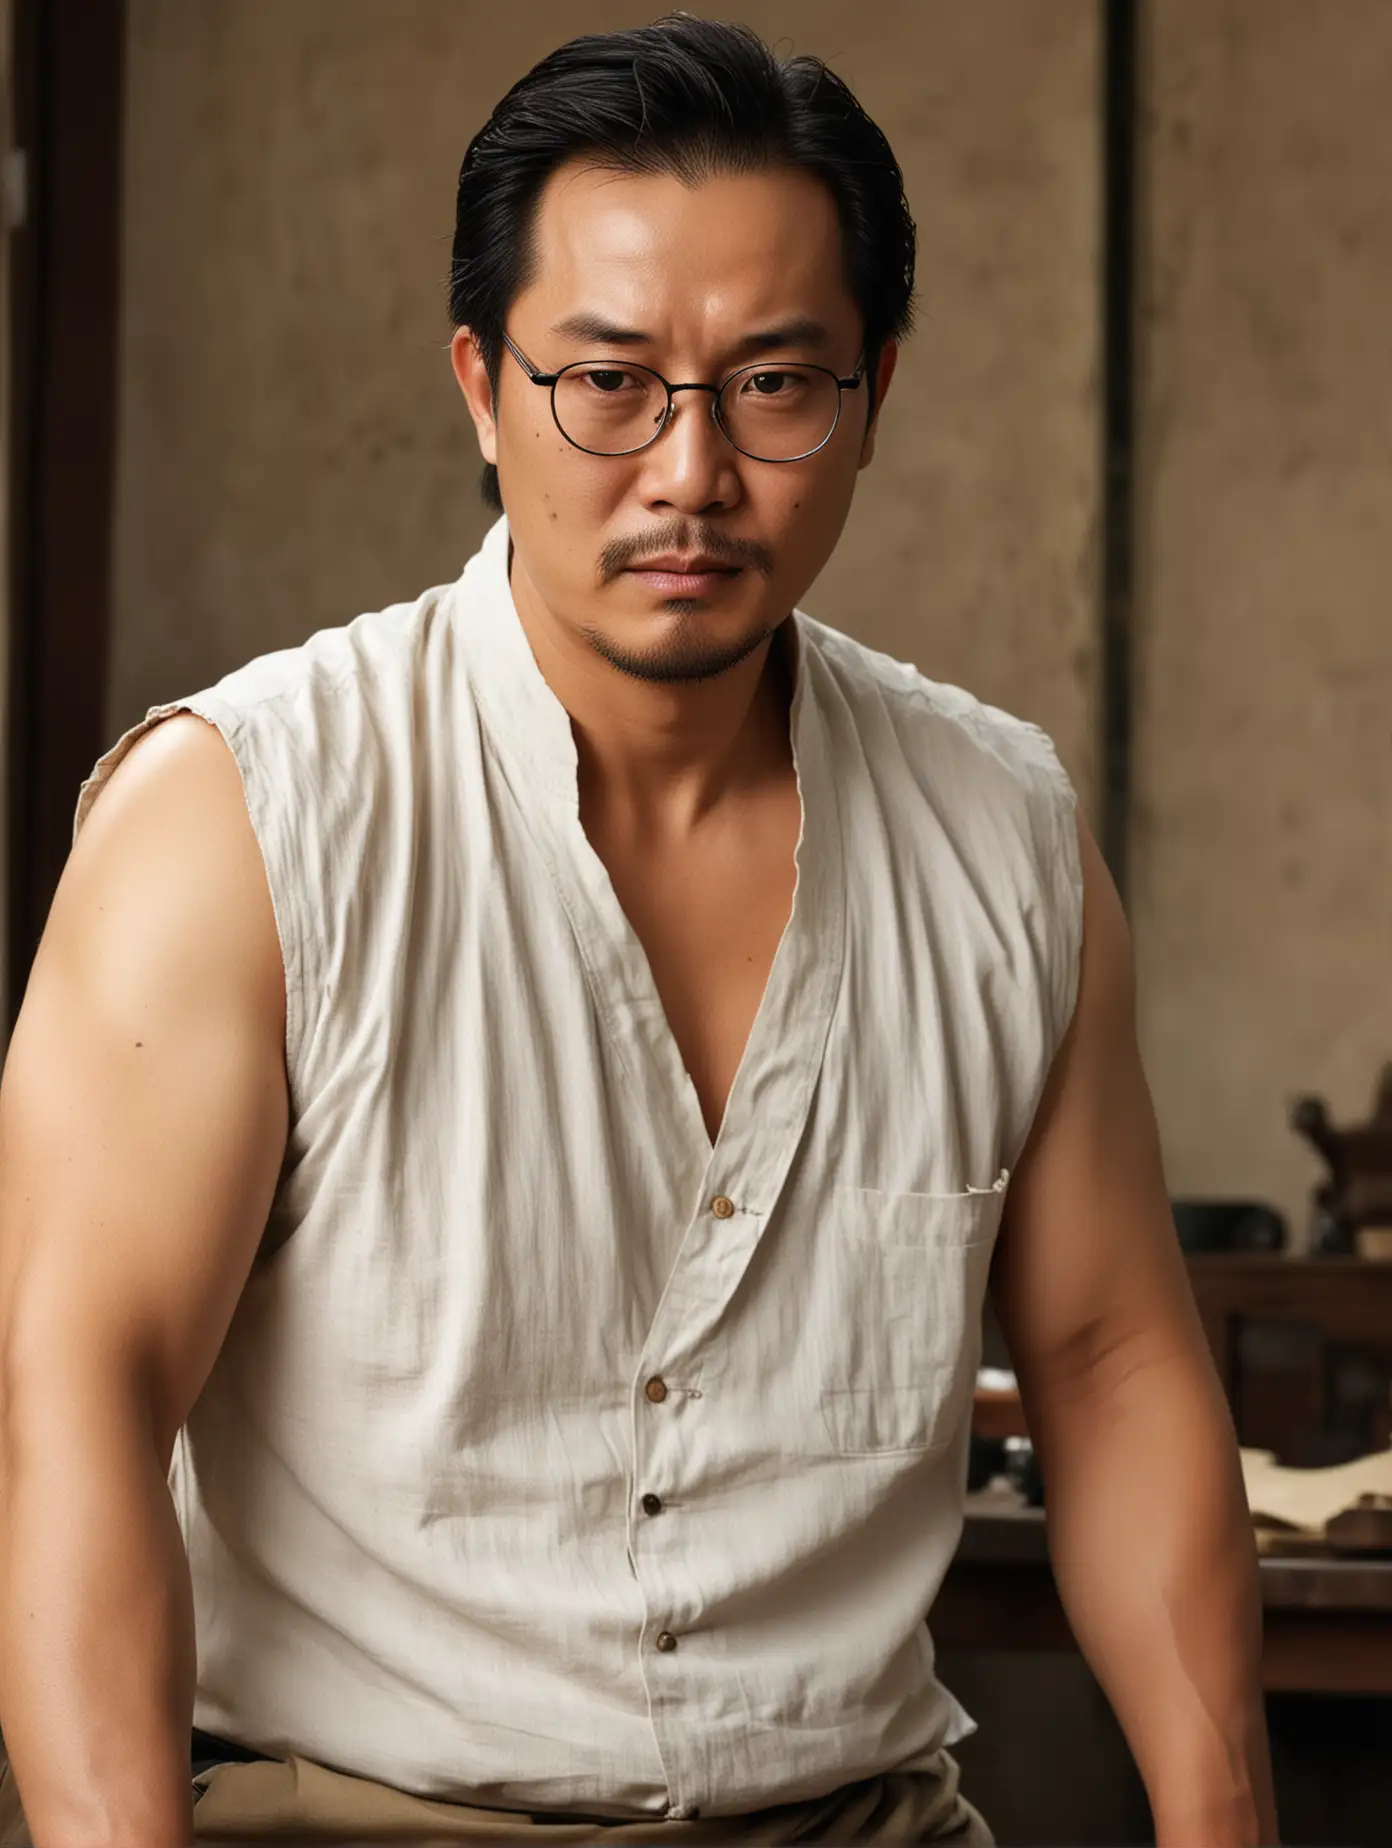 Asian face, middle-aged man, the character of 'the tailor winning brother' in the movie ‘Crouching Tiger, Hidden Dragon’, oily middle-aged man, a feeling of seeing through everything, wearing a white sleeveless shirt, a bit fat, has a beer belly, black framed glasses, a soft ruler hanging around the neck, background is a tailor shop, with a sewing machine in front